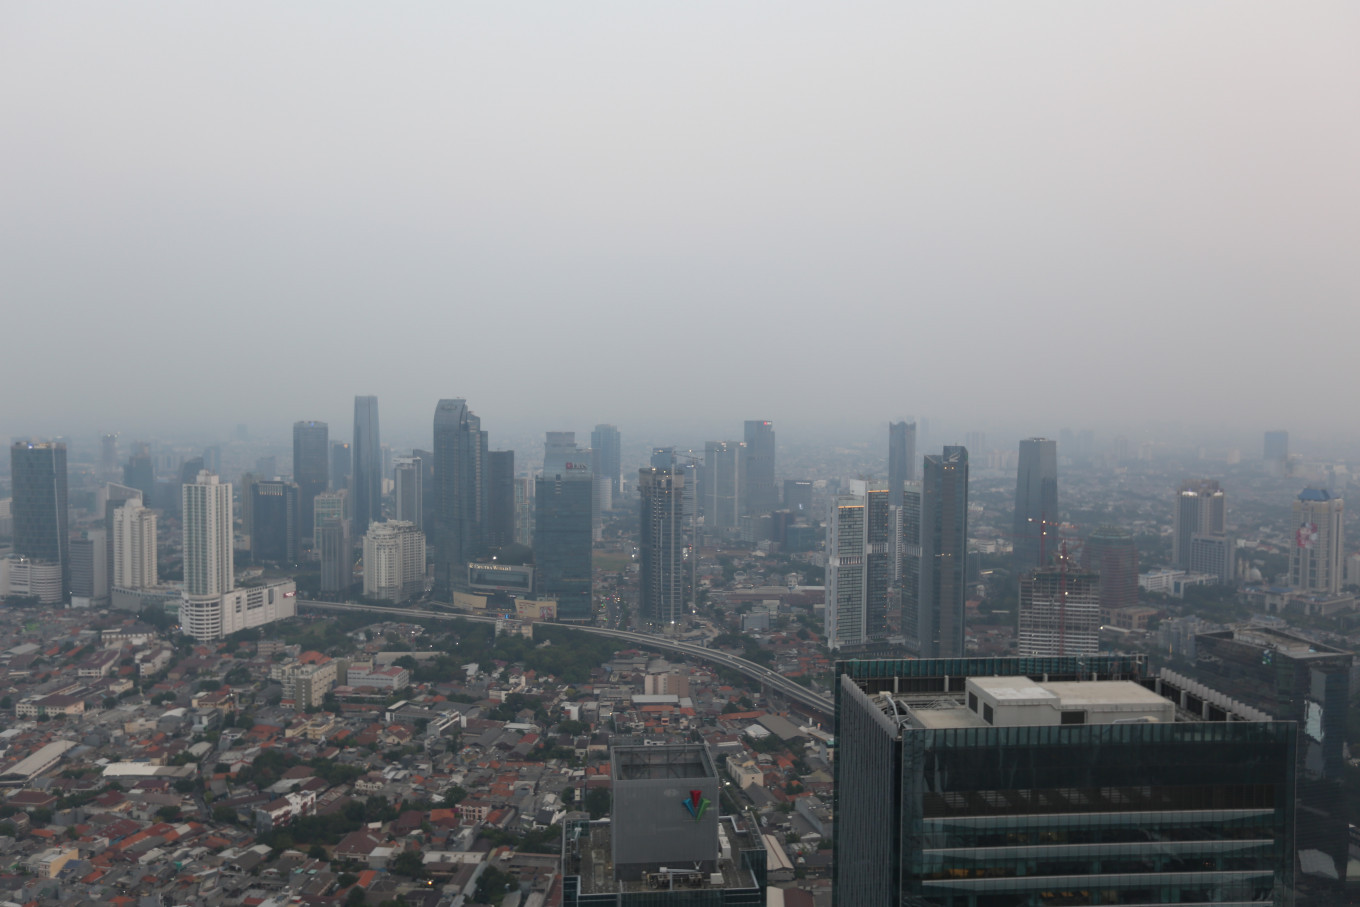 https://www.thejakartapost.com/life/2021/04/15/noise-pollution-poses-long-term-risk-to-trees-study-.html